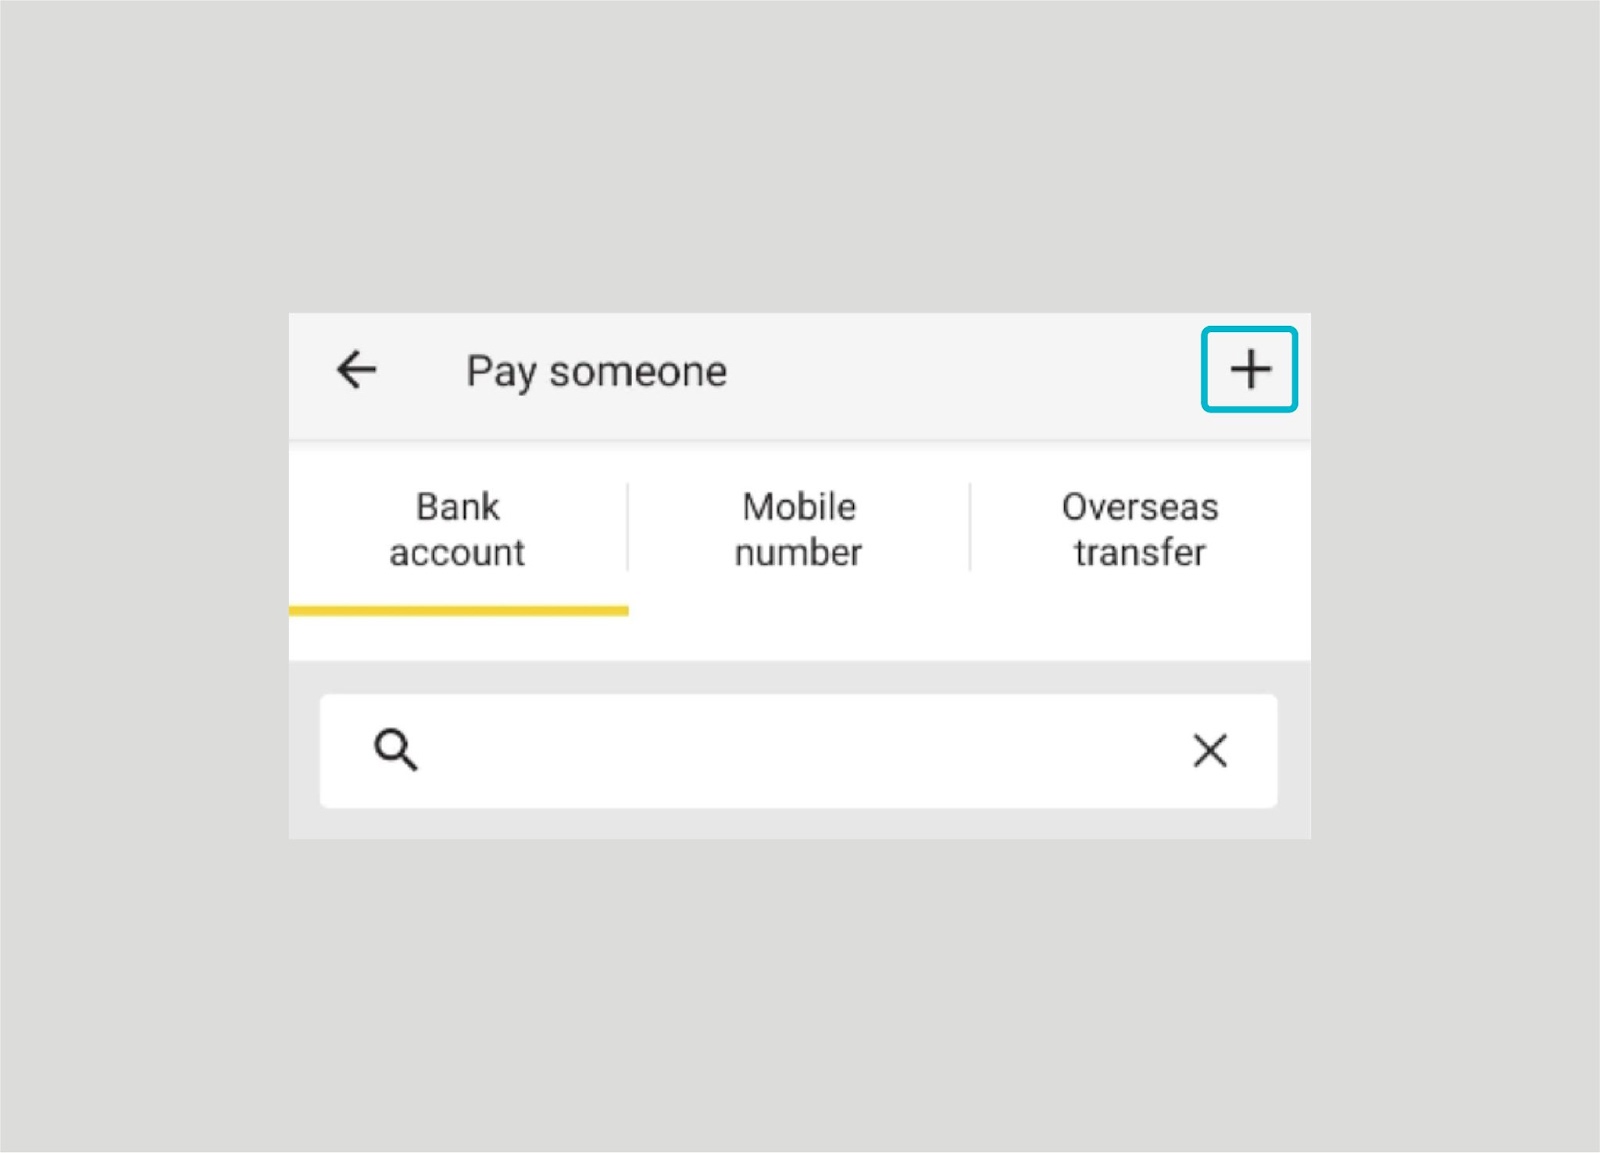 Select + to pay someone NEW